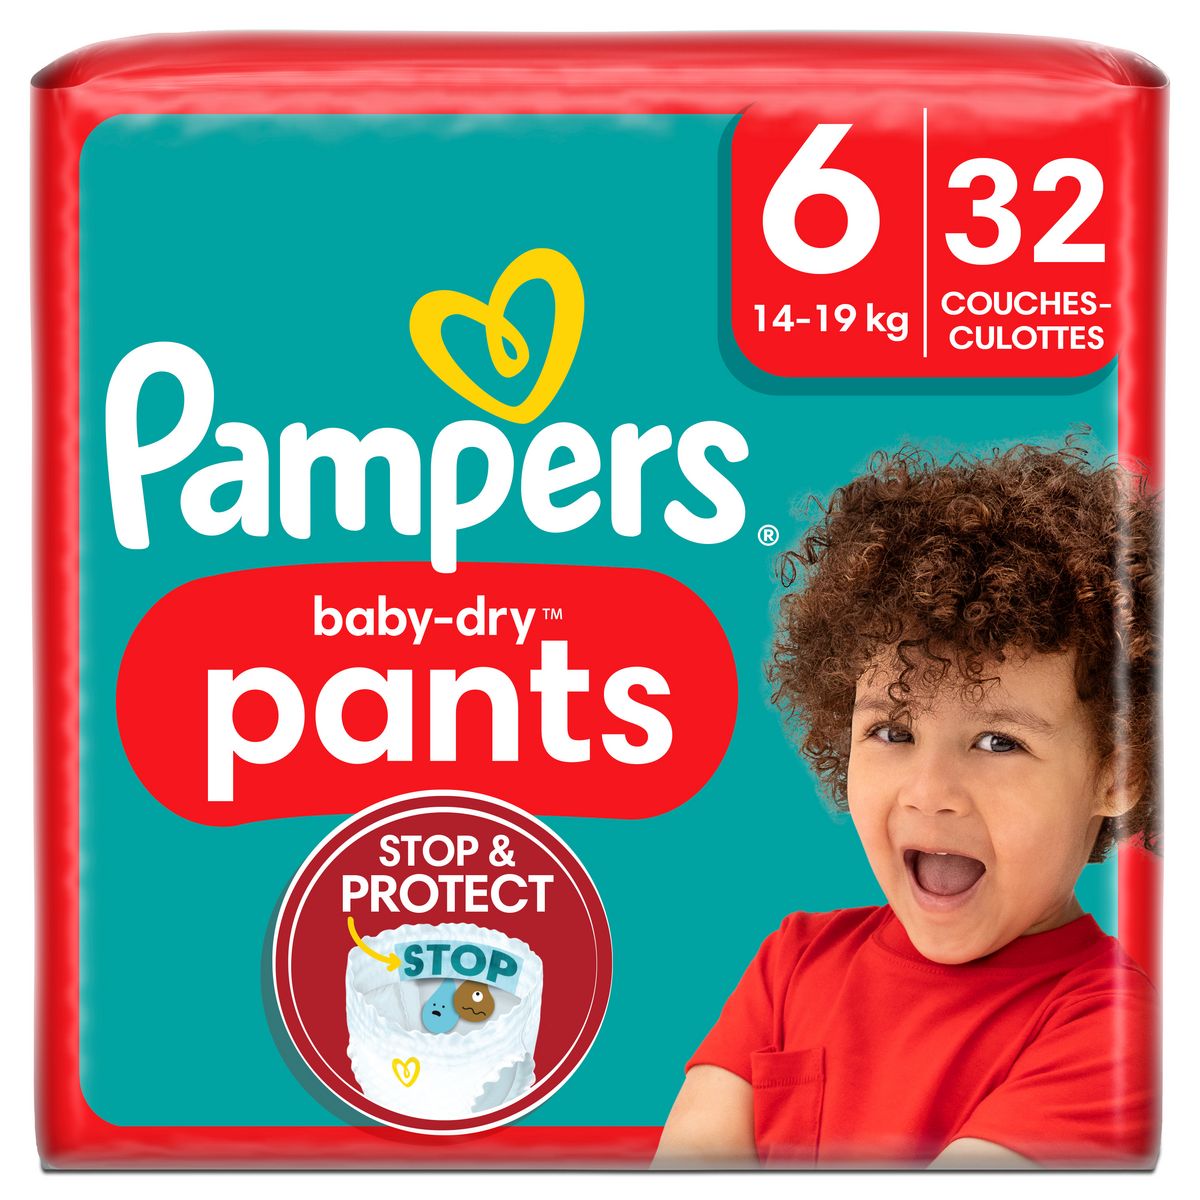 PAMPERS Baby-Dry pants couches-culottes taille 6 (14-19kg) 32 couches